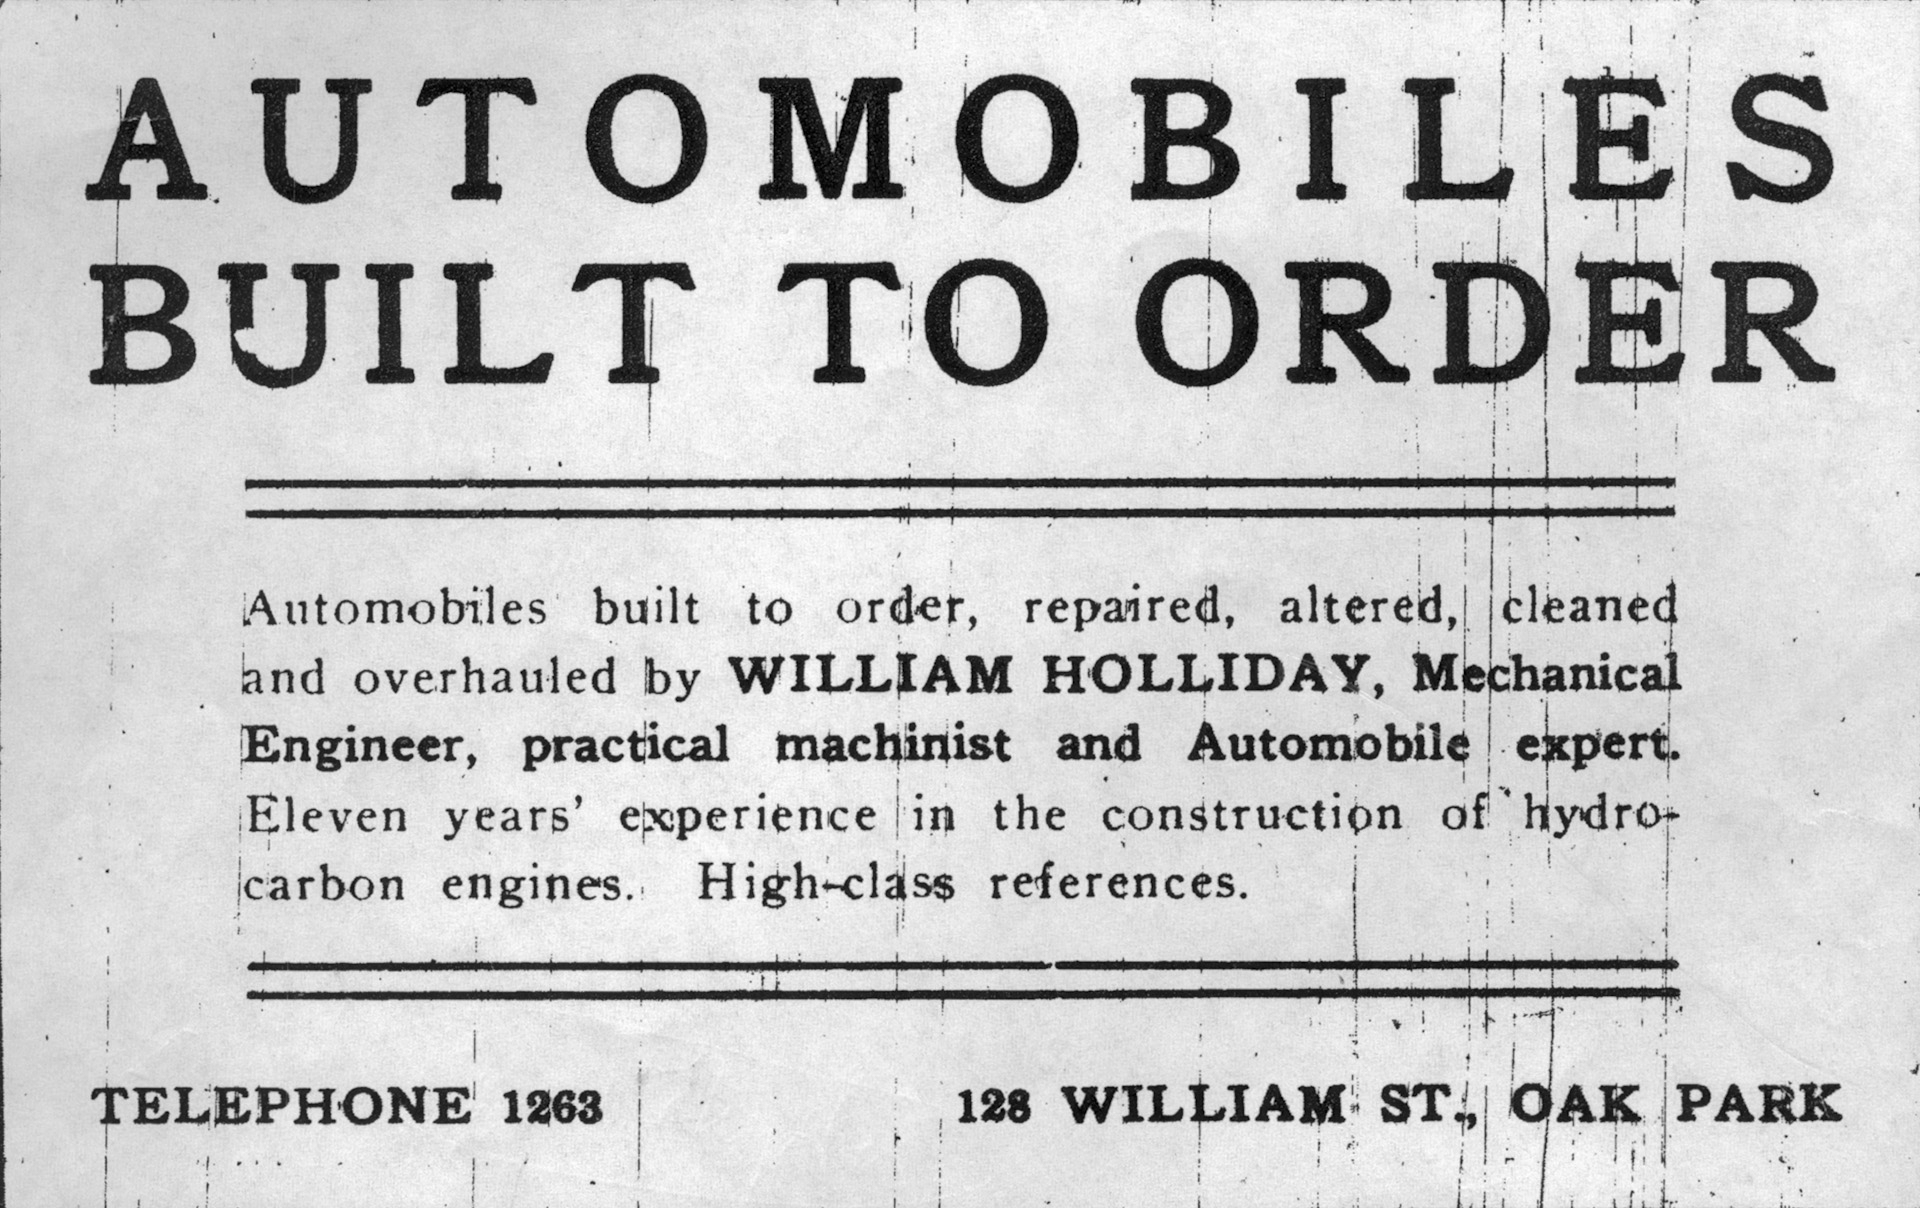 William Holliday was an entrepreneur who designed and made automobiles in his machine shop across the street from Mt. Carmel Baptist Church, in the heart of Oak Park's Black neighborhood. This 1907 ad in the local newspaper, the year before Henry Ford launched his Model T, touts experience dating to 1895.